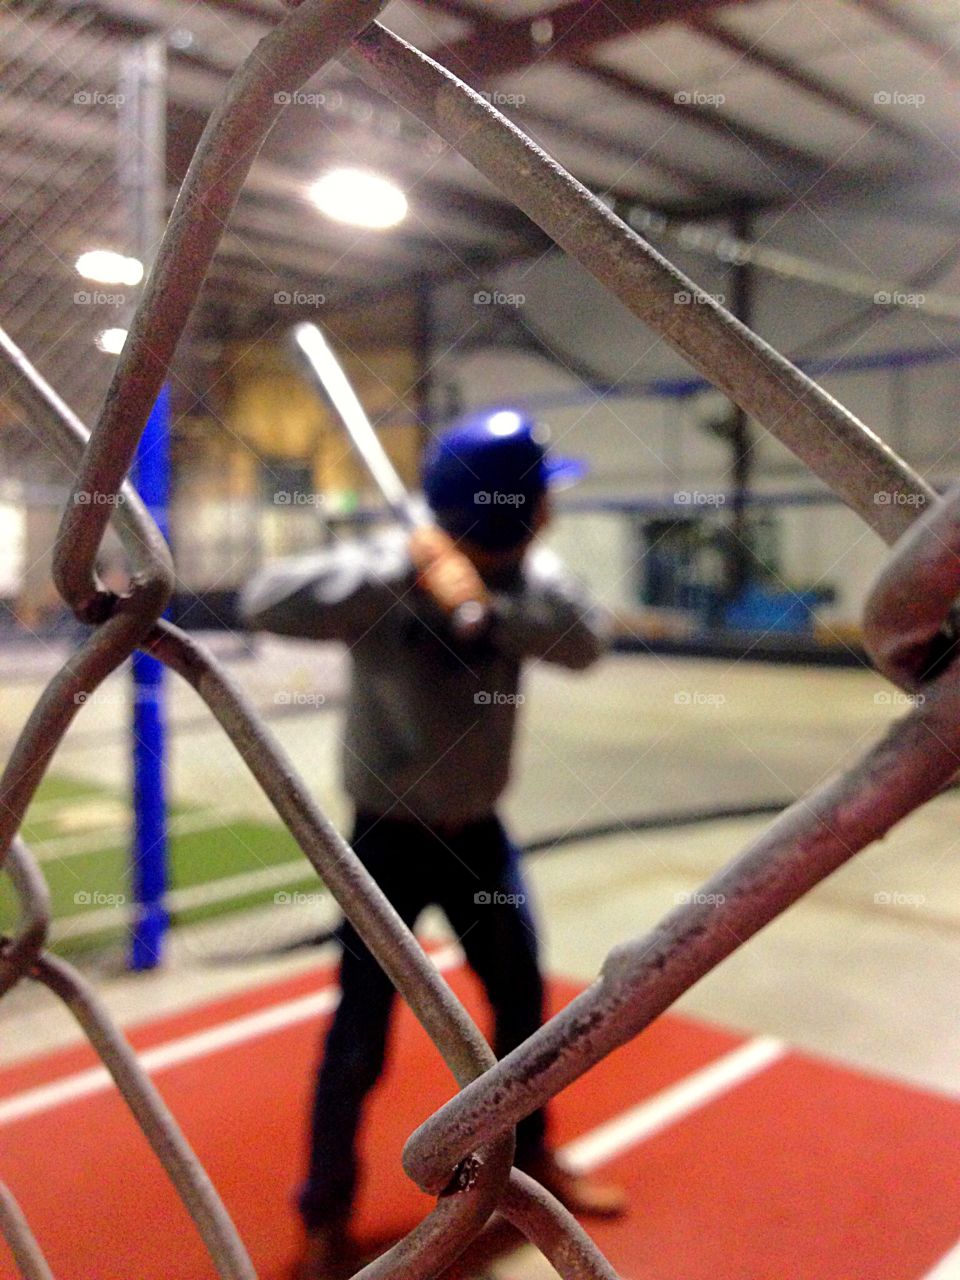 Date night at the batting cages in Northern California 